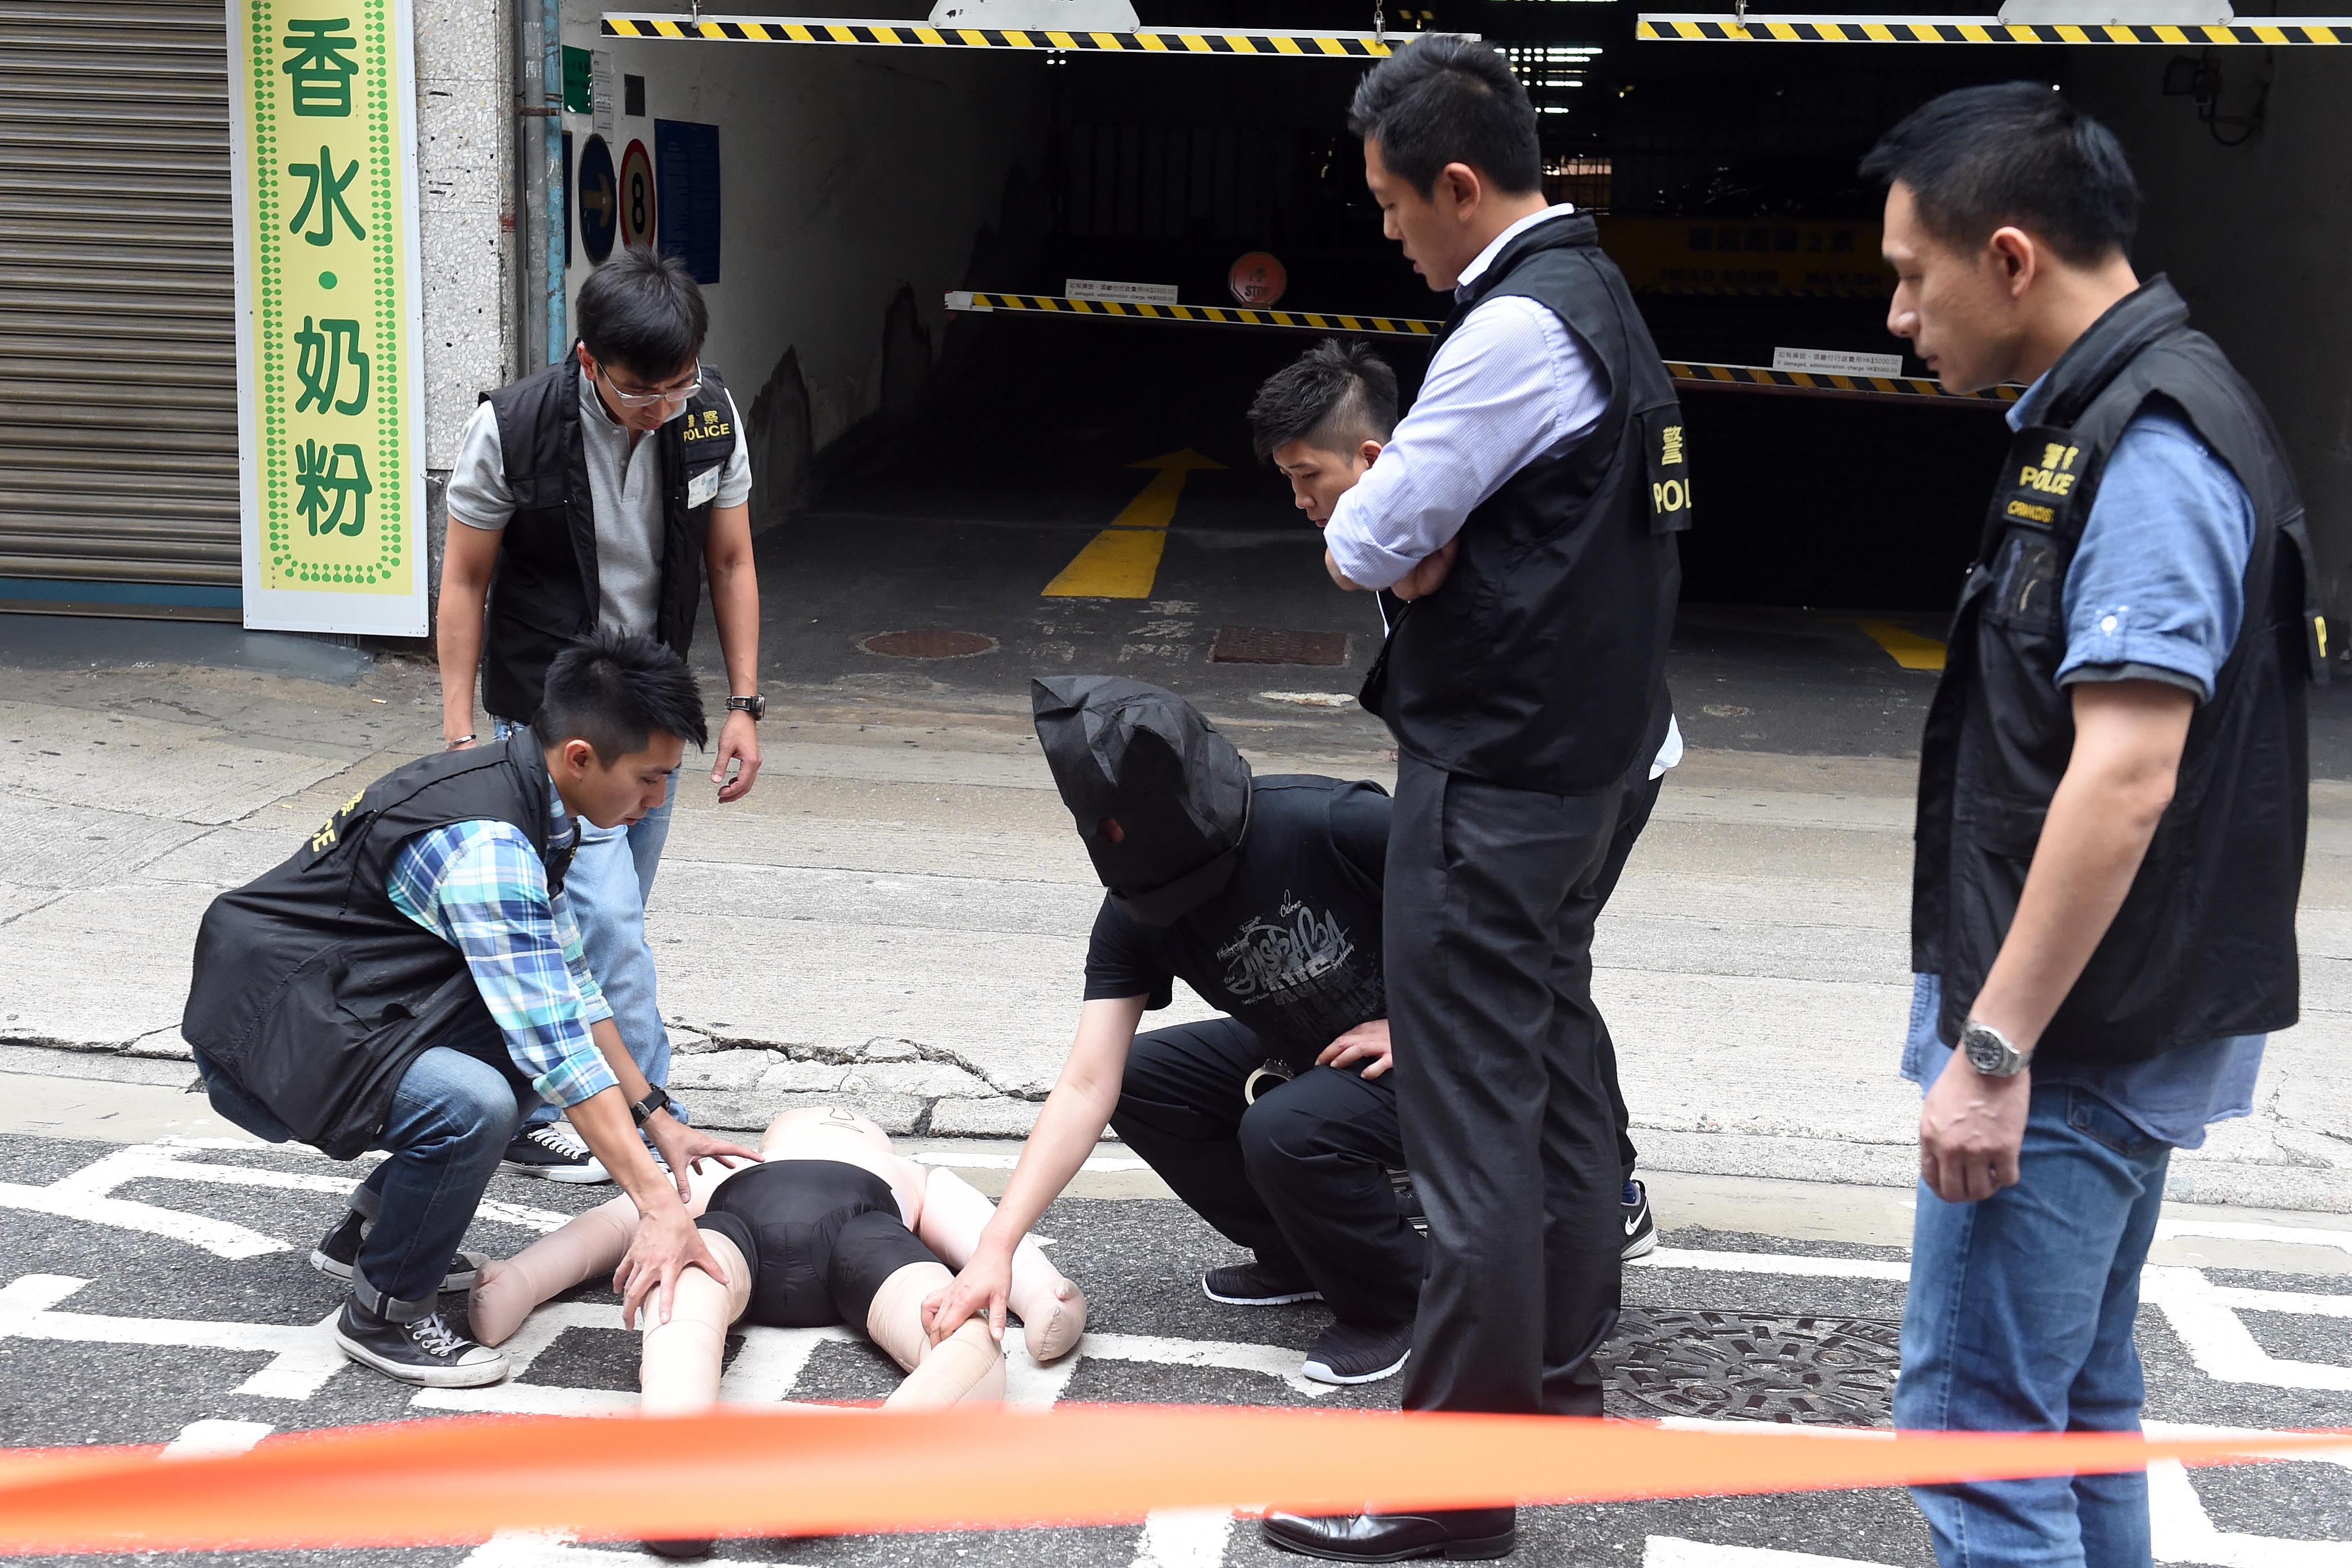 On October 21, the Hong Kong police brought a suspect to examine the crime scene where a mainland tourist was beaten to death earlier this week